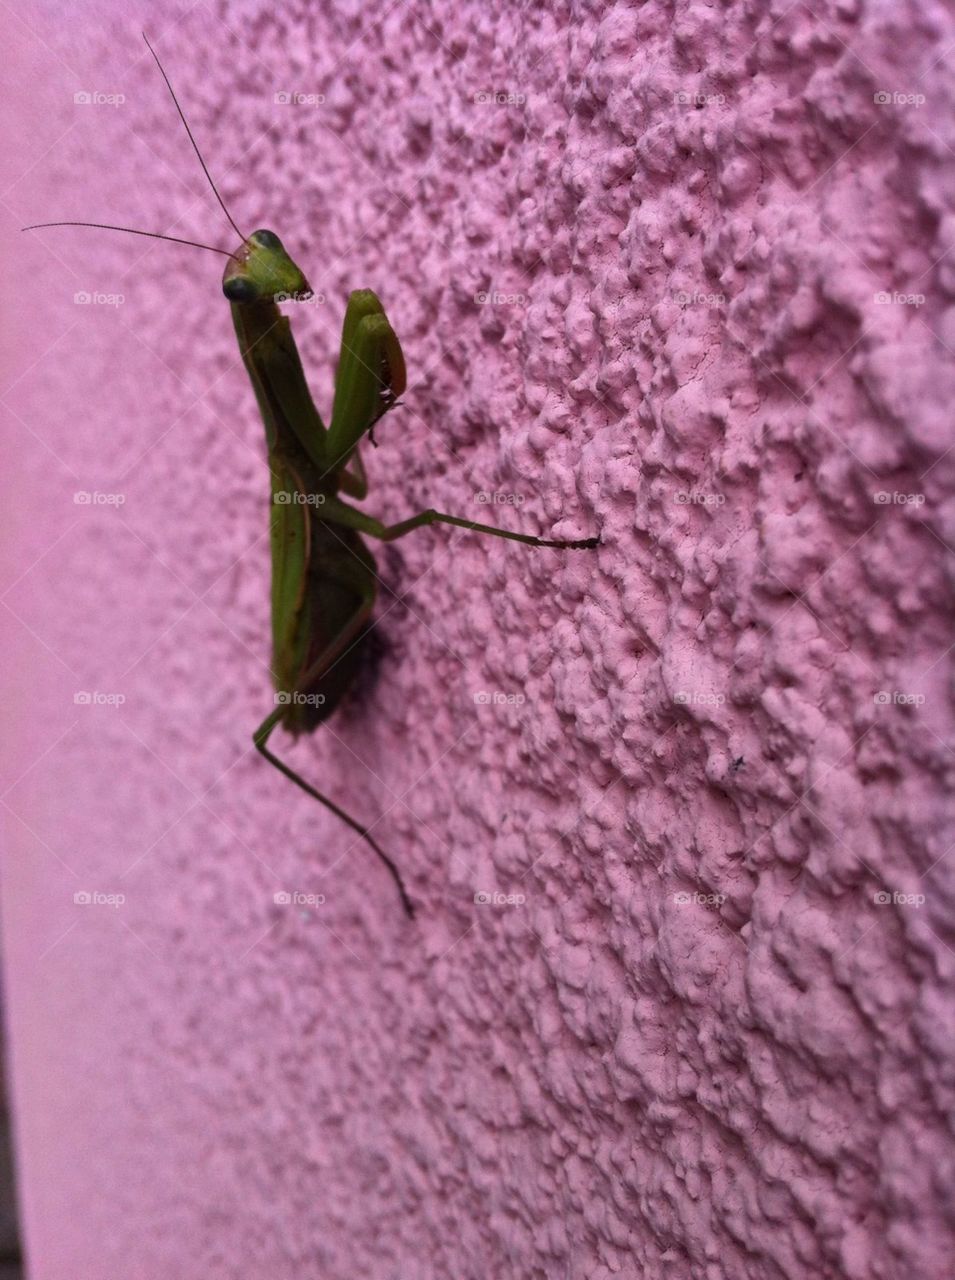 grasshopper on the wall